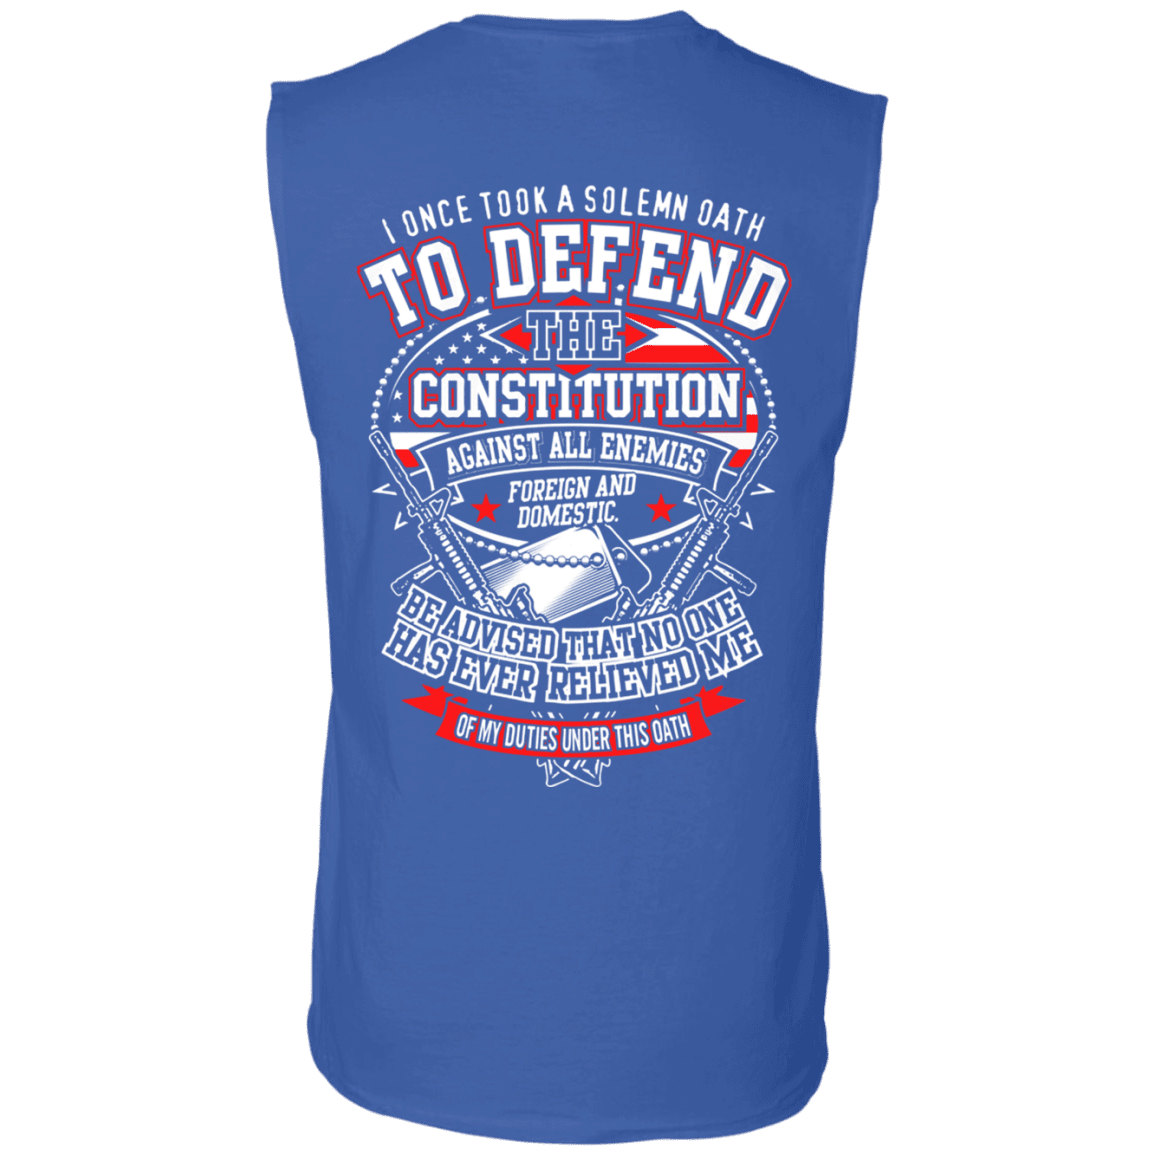 Military T-Shirt "I Once Tool A Solemn Oath to Defend The Constitution" Men Back-TShirt-General-Veterans Nation